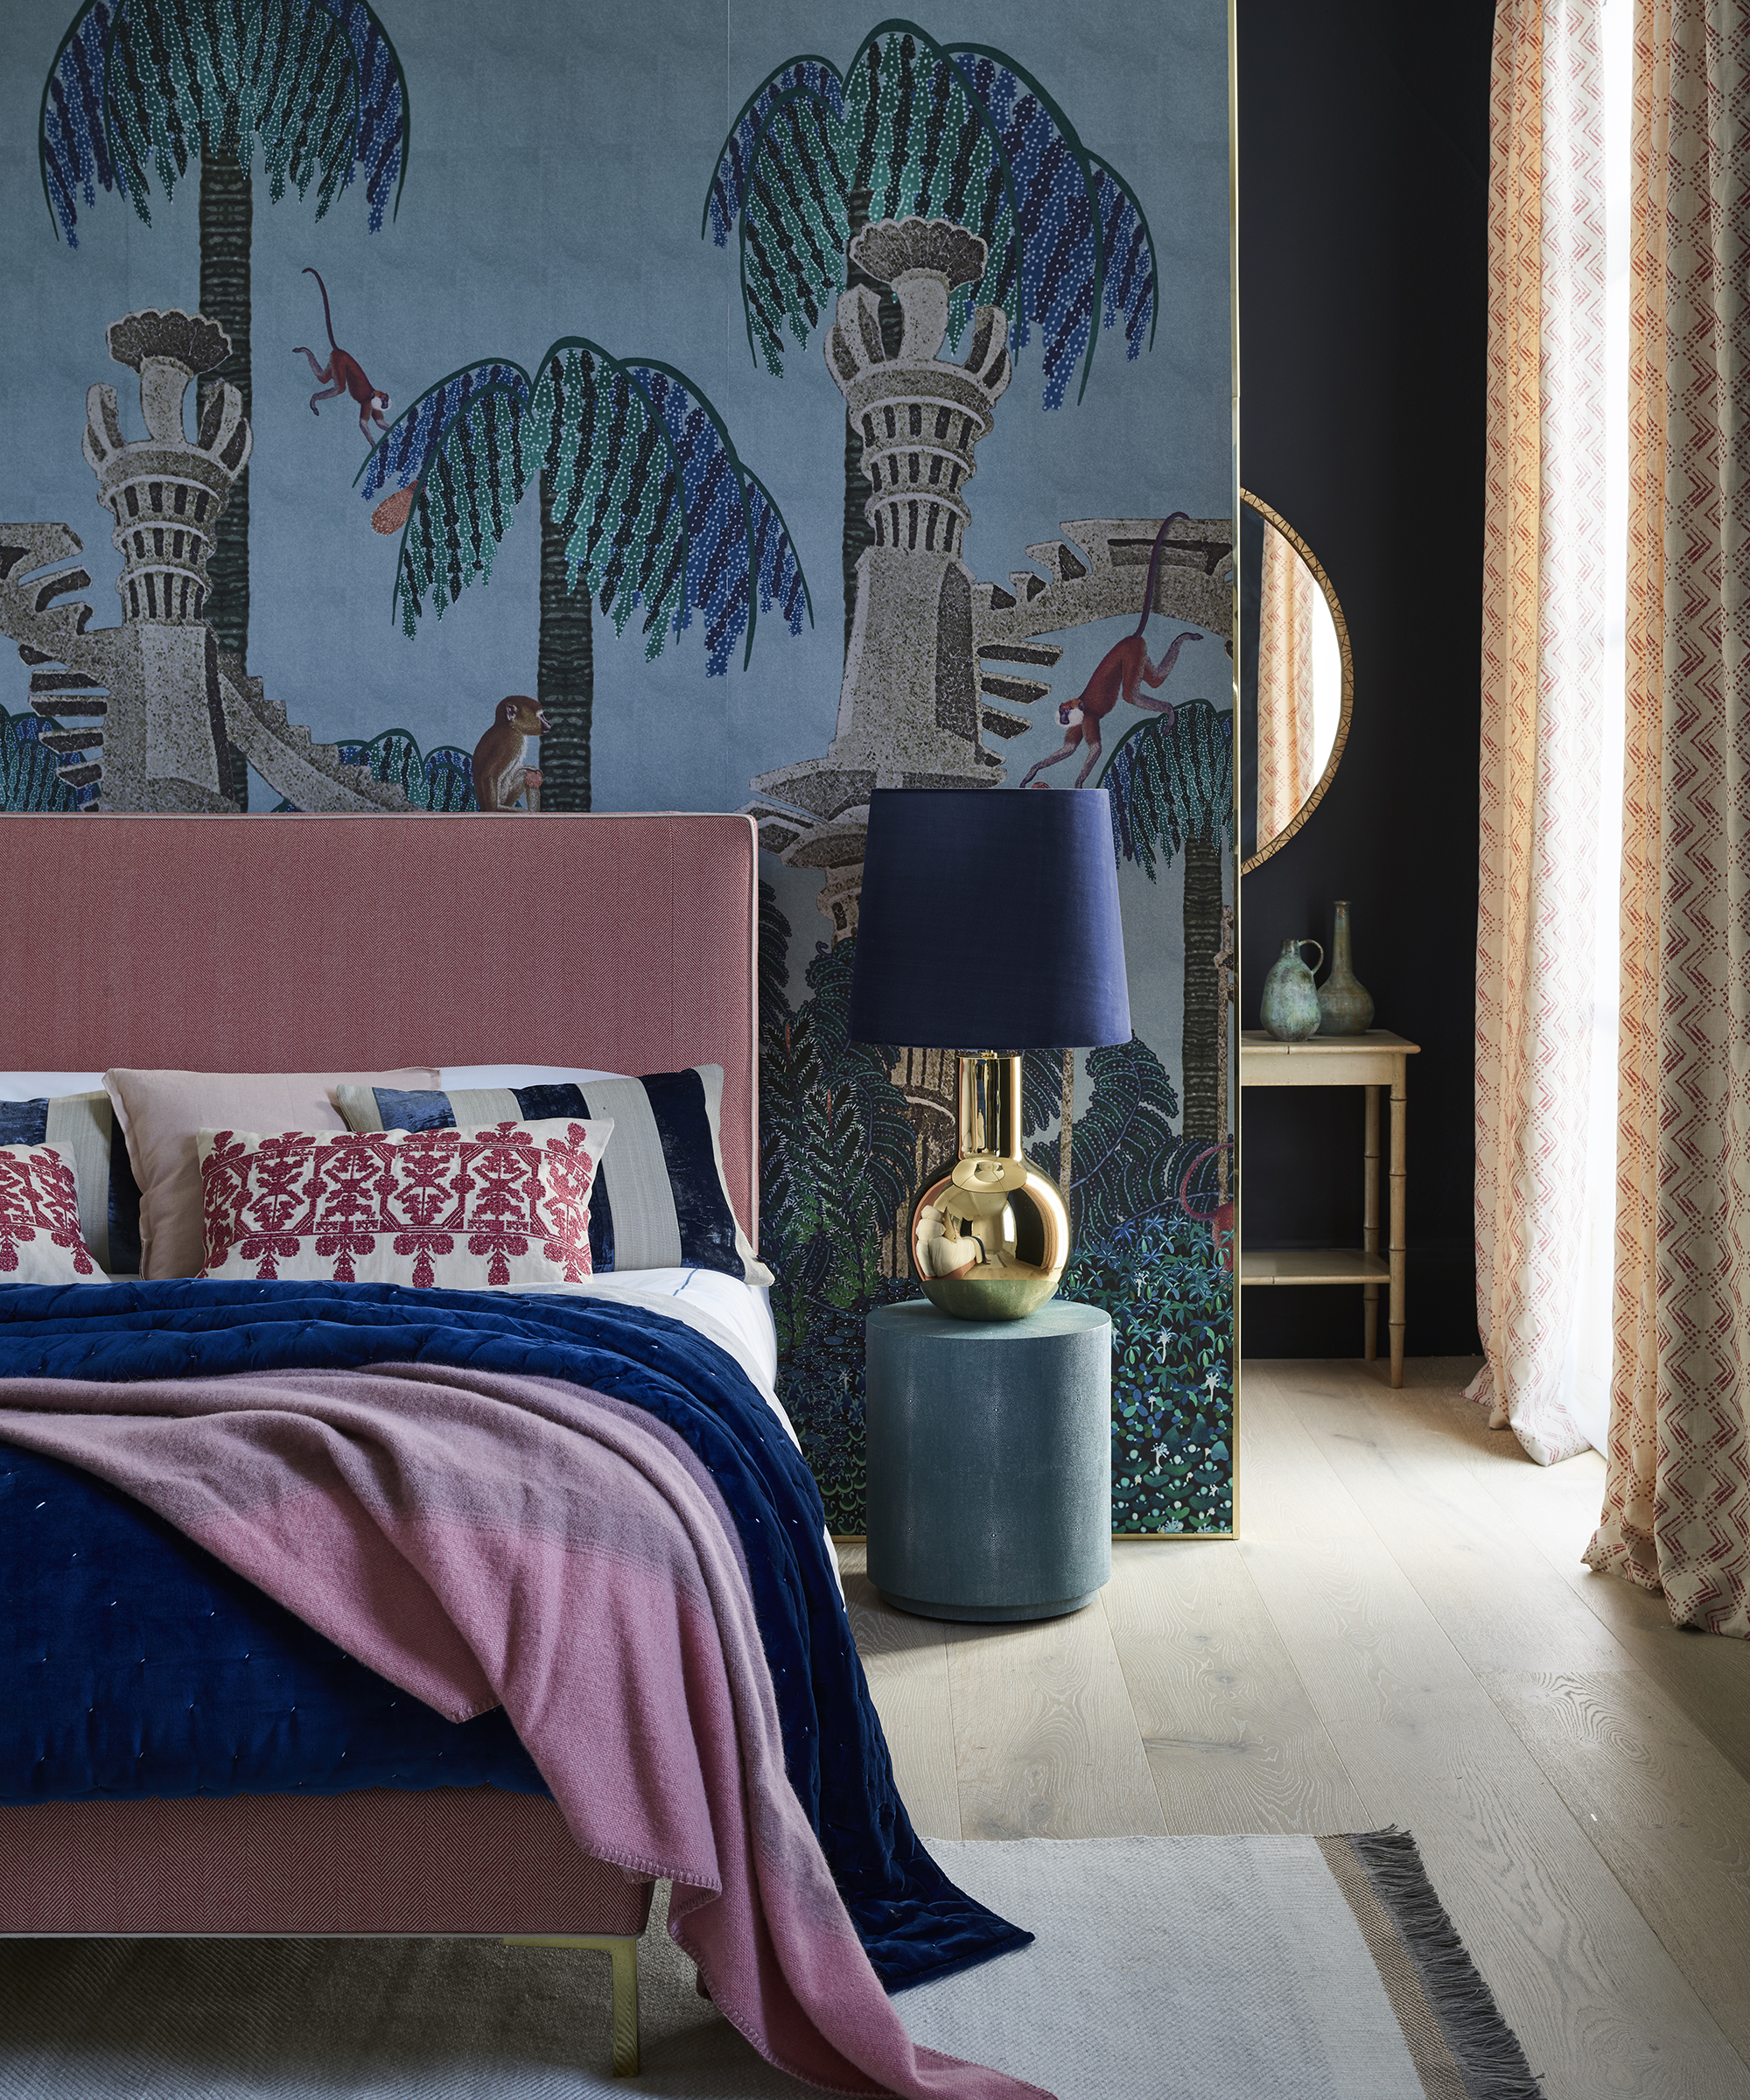 A pink bed in front of a wallpapered wall containing monkeys and trees